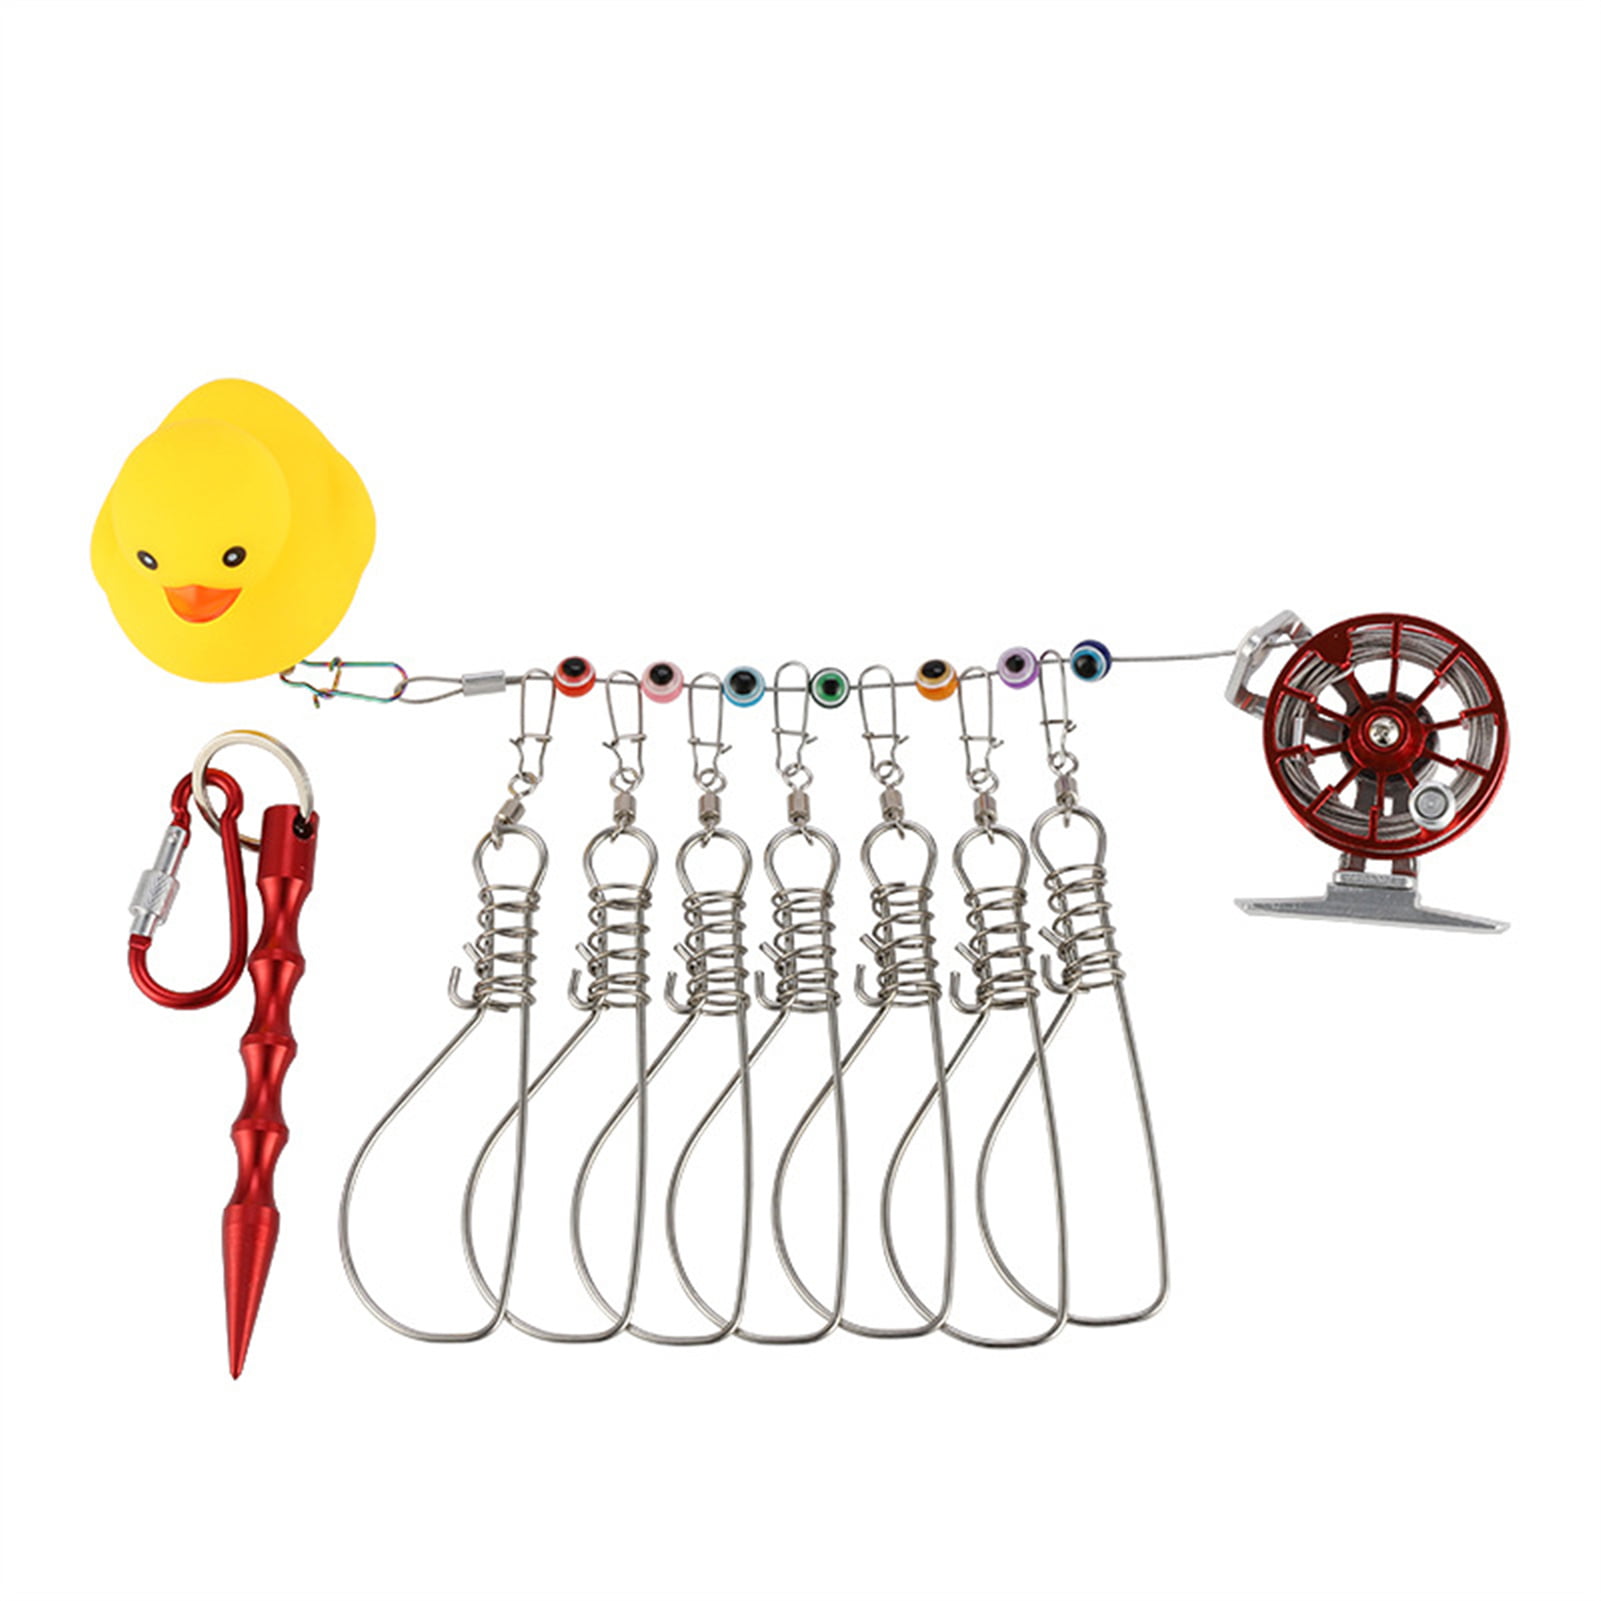 Portable Adjustable Fish Stringer with Reel Steel Wire